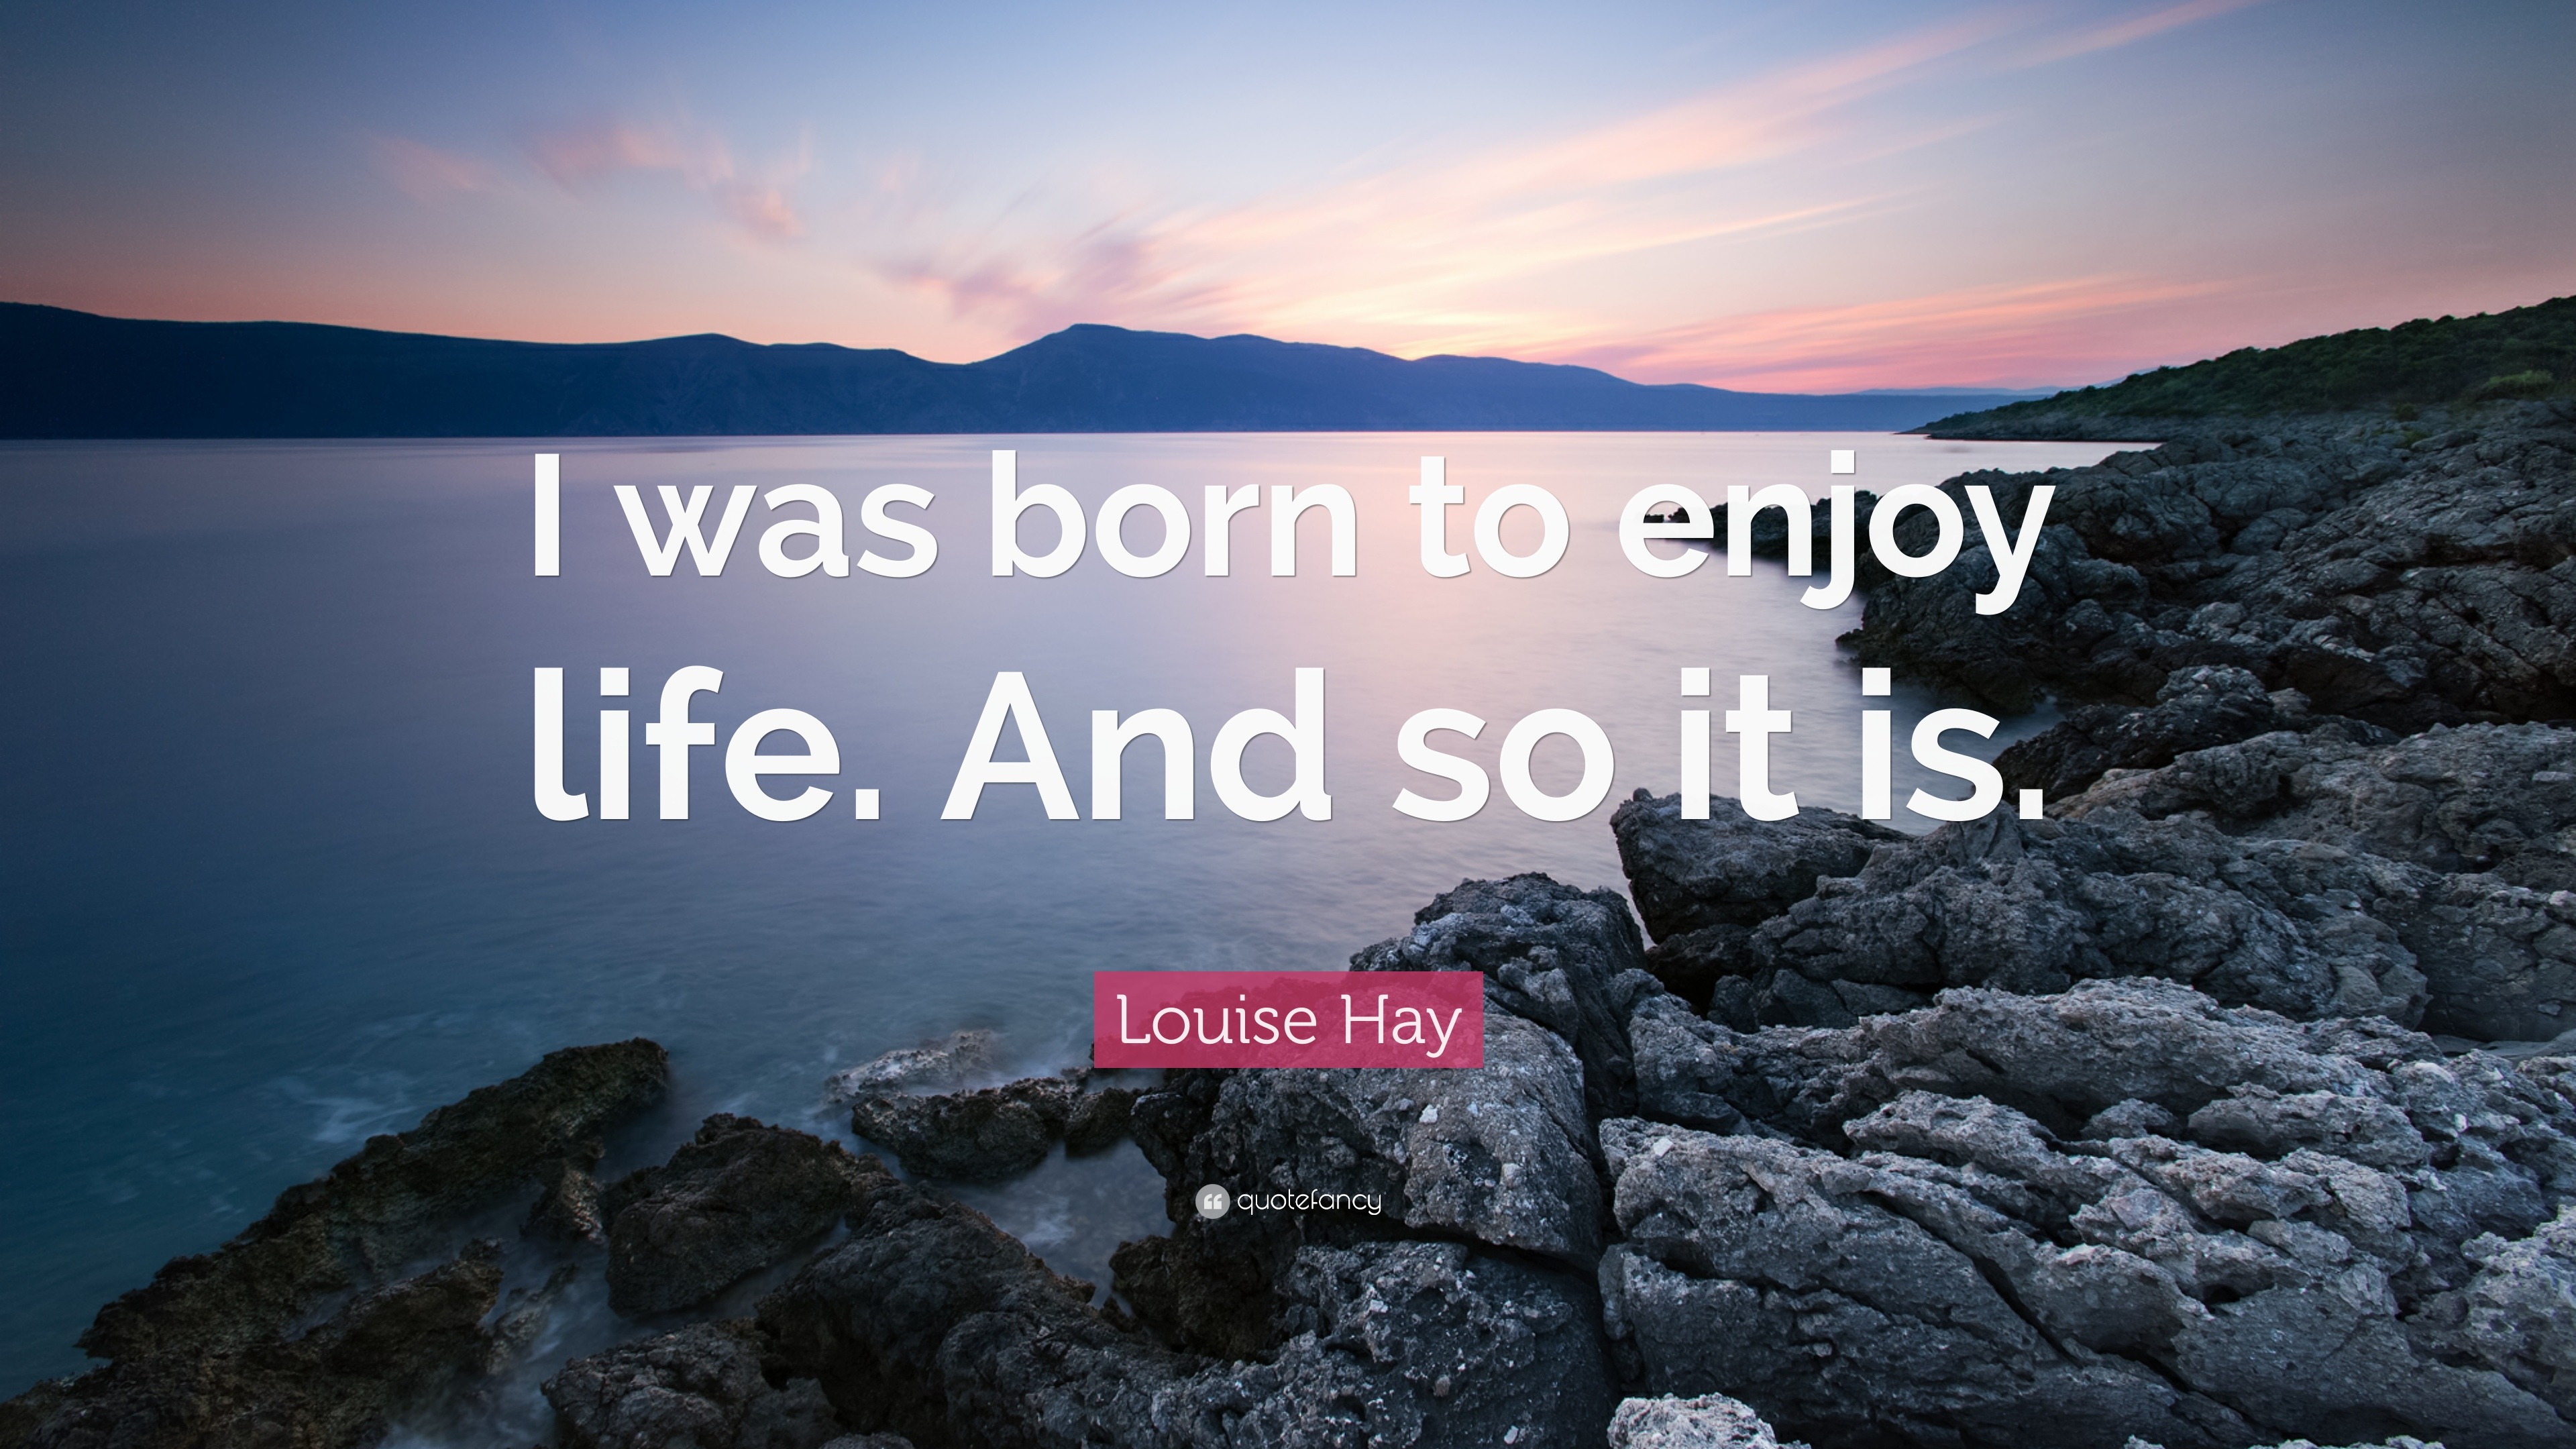 Louise Hay Quote “I was born to enjoy life And so it is